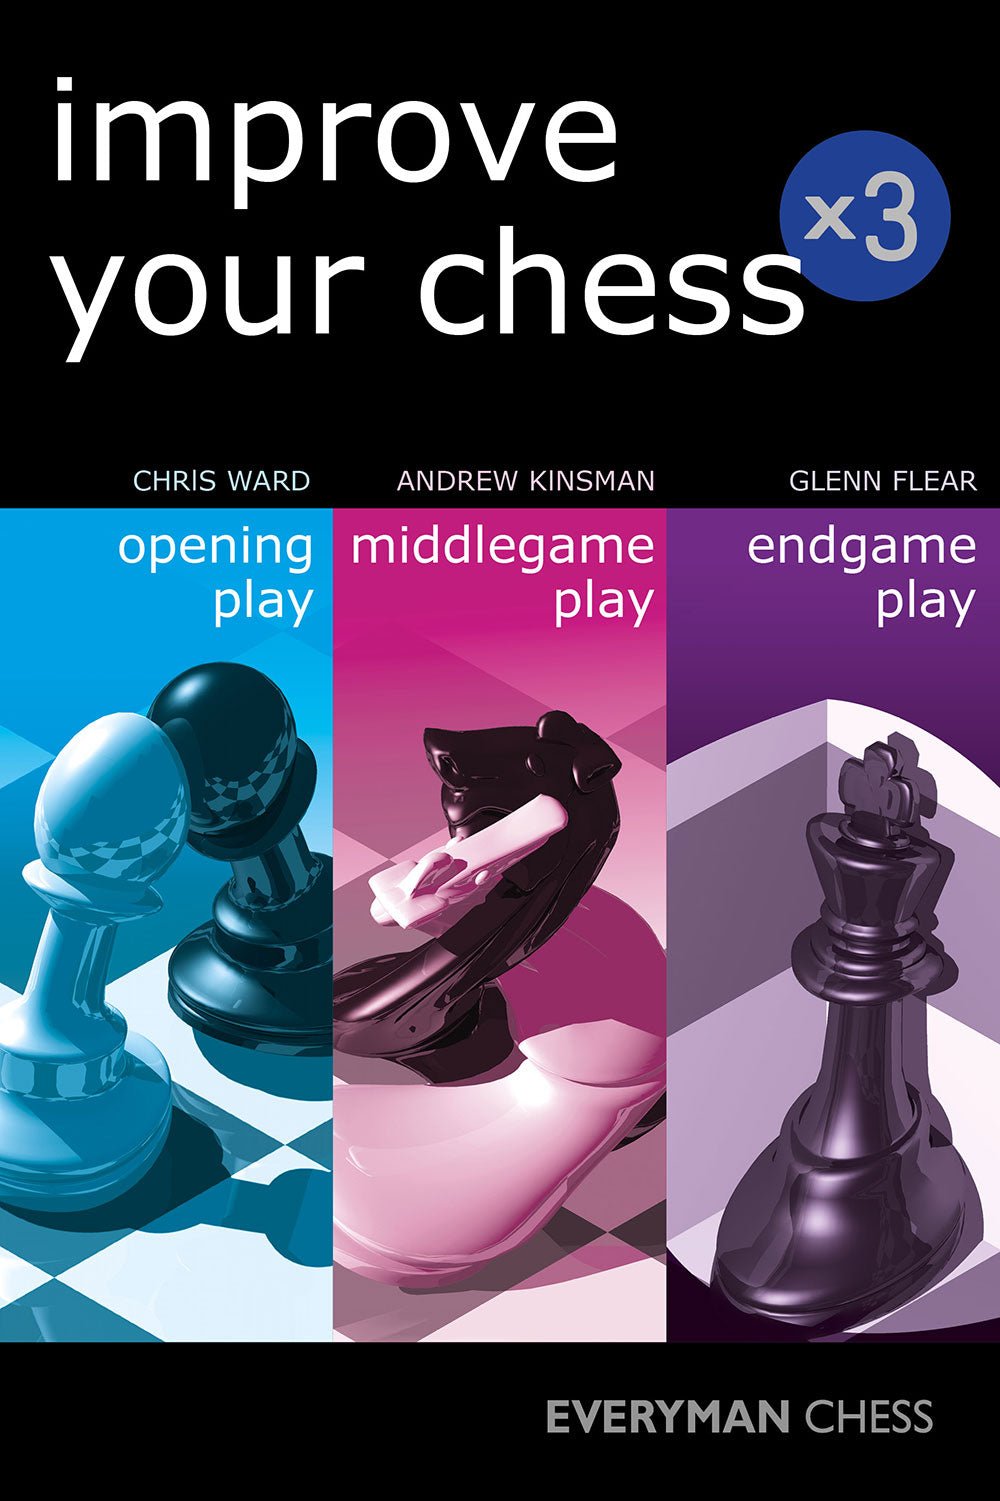 Understanding Chess Middlegames - PDF Free Download